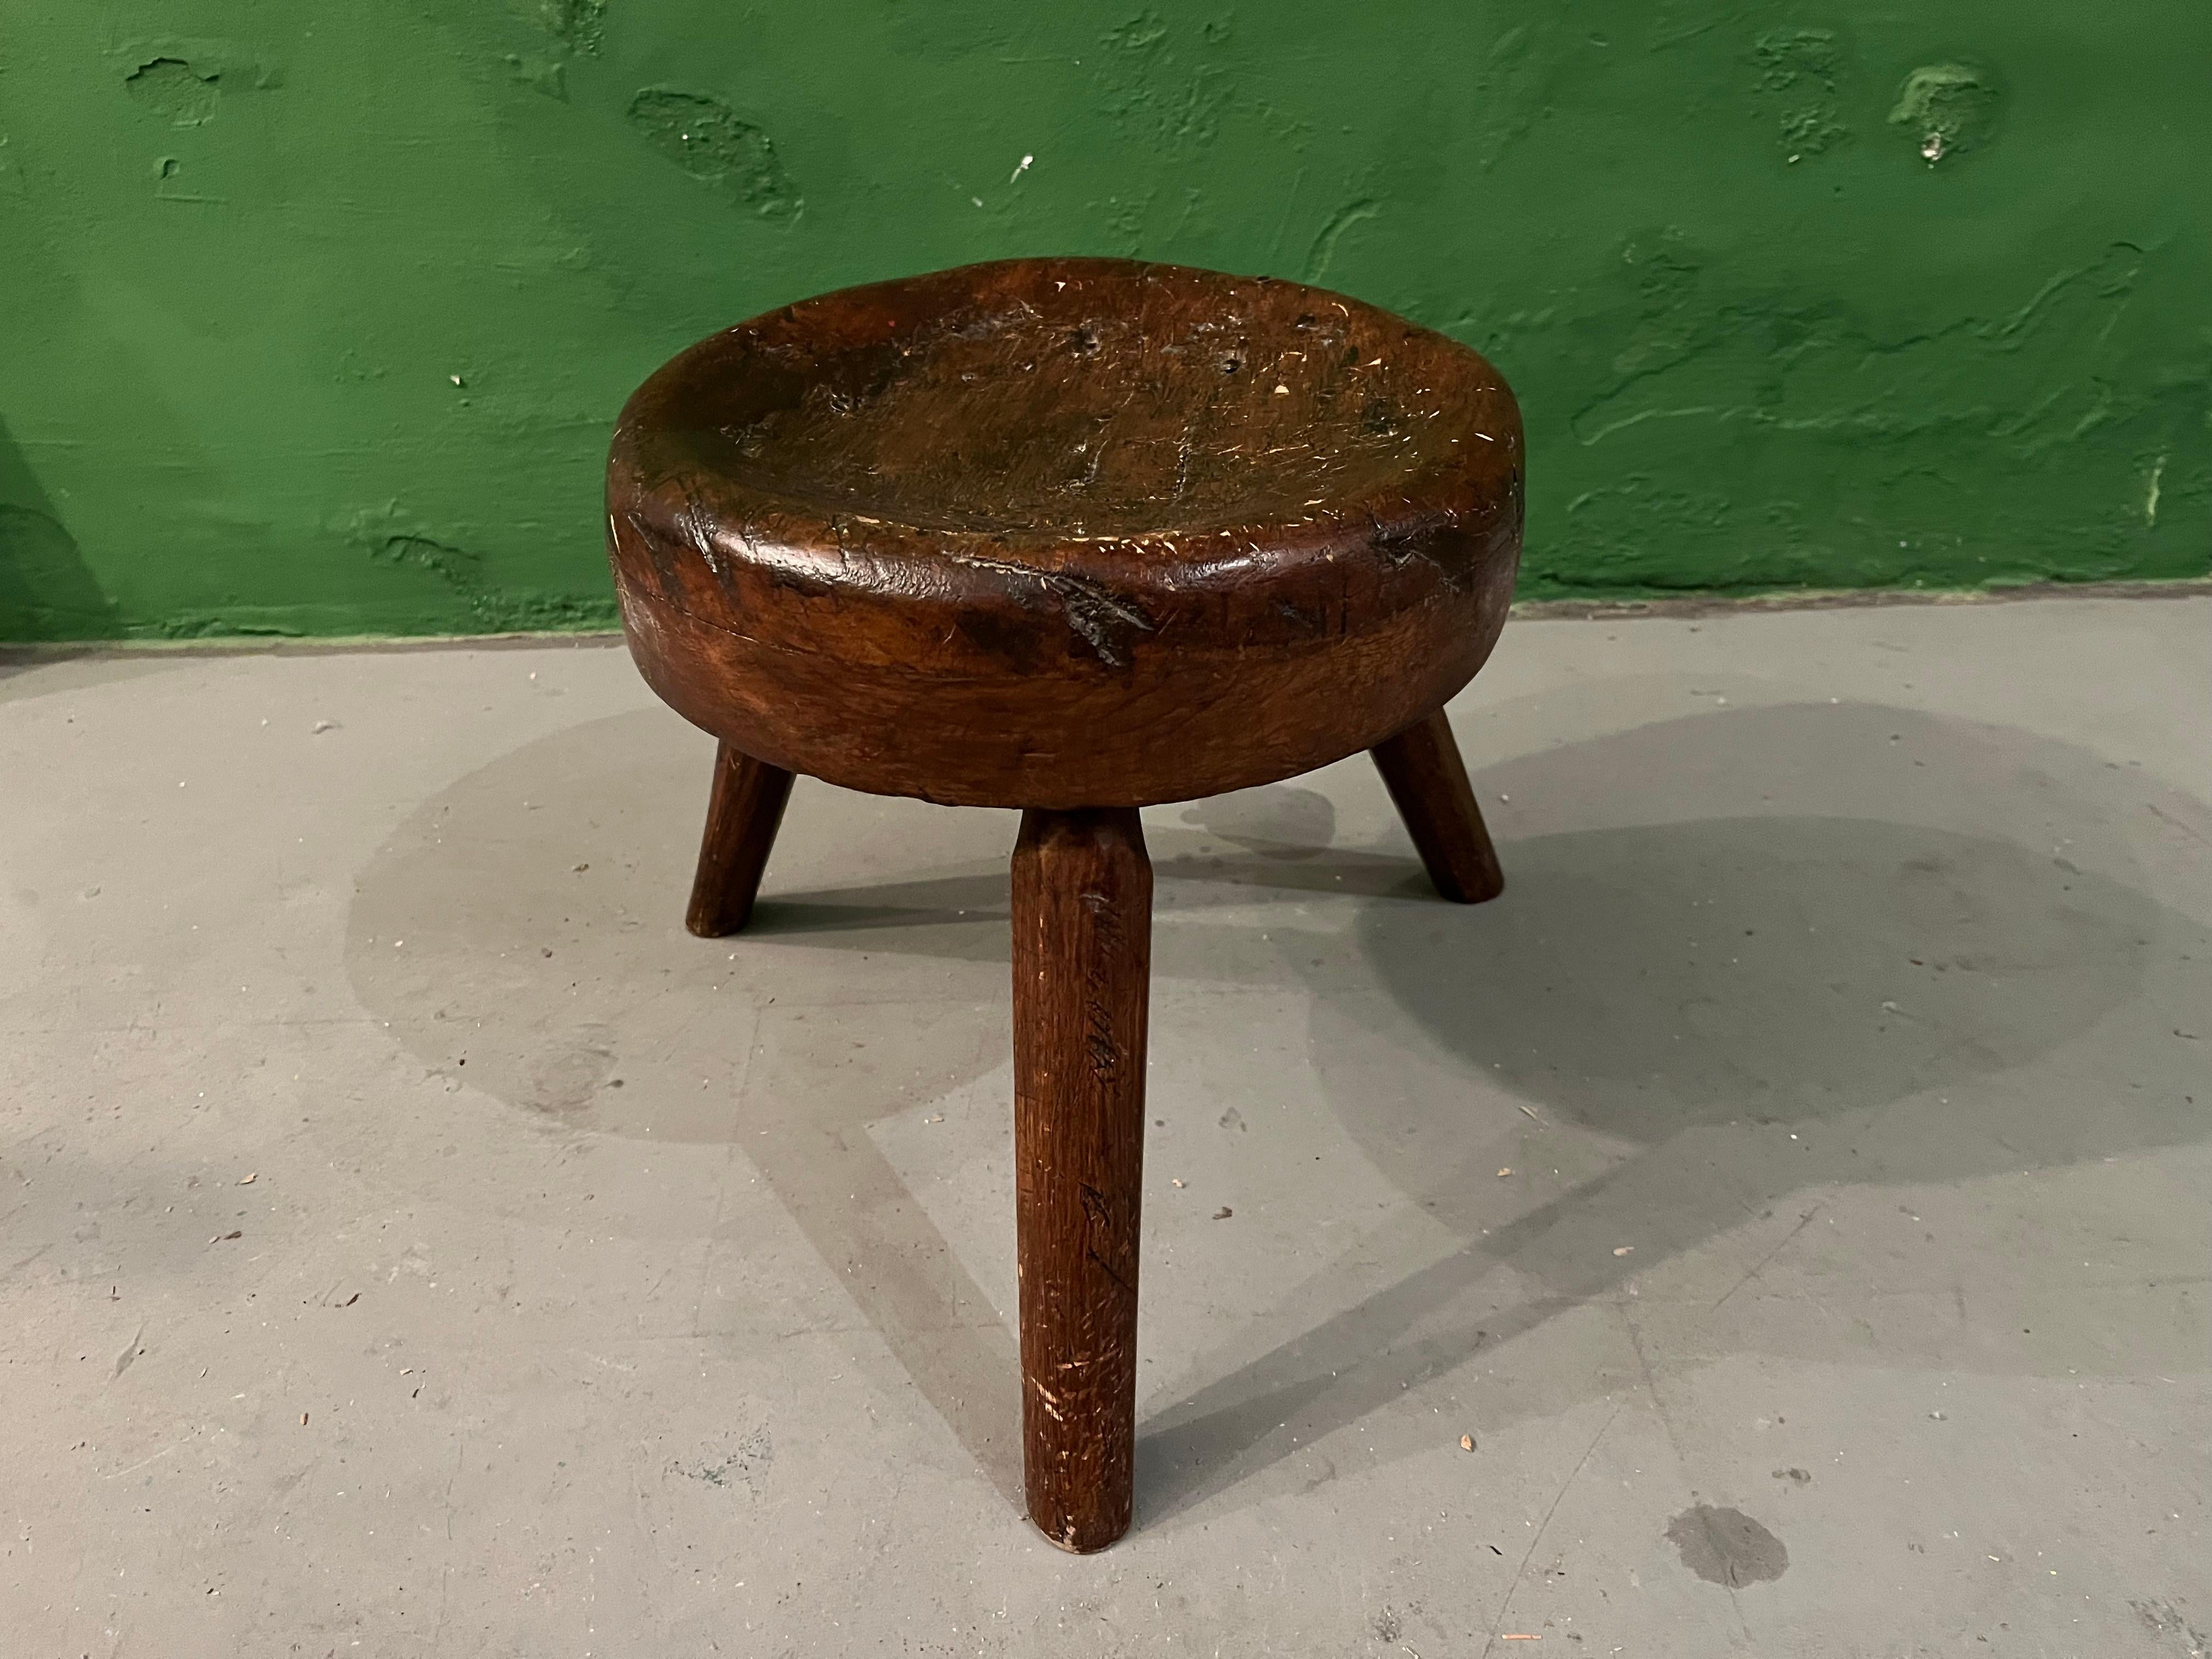 Ancient french stool with the most beautiful pattina, oak.
Charlotte Perriand was shurly insired by these kinds of classic craftsmenship and made the same stools in this style. This stool is full of history.